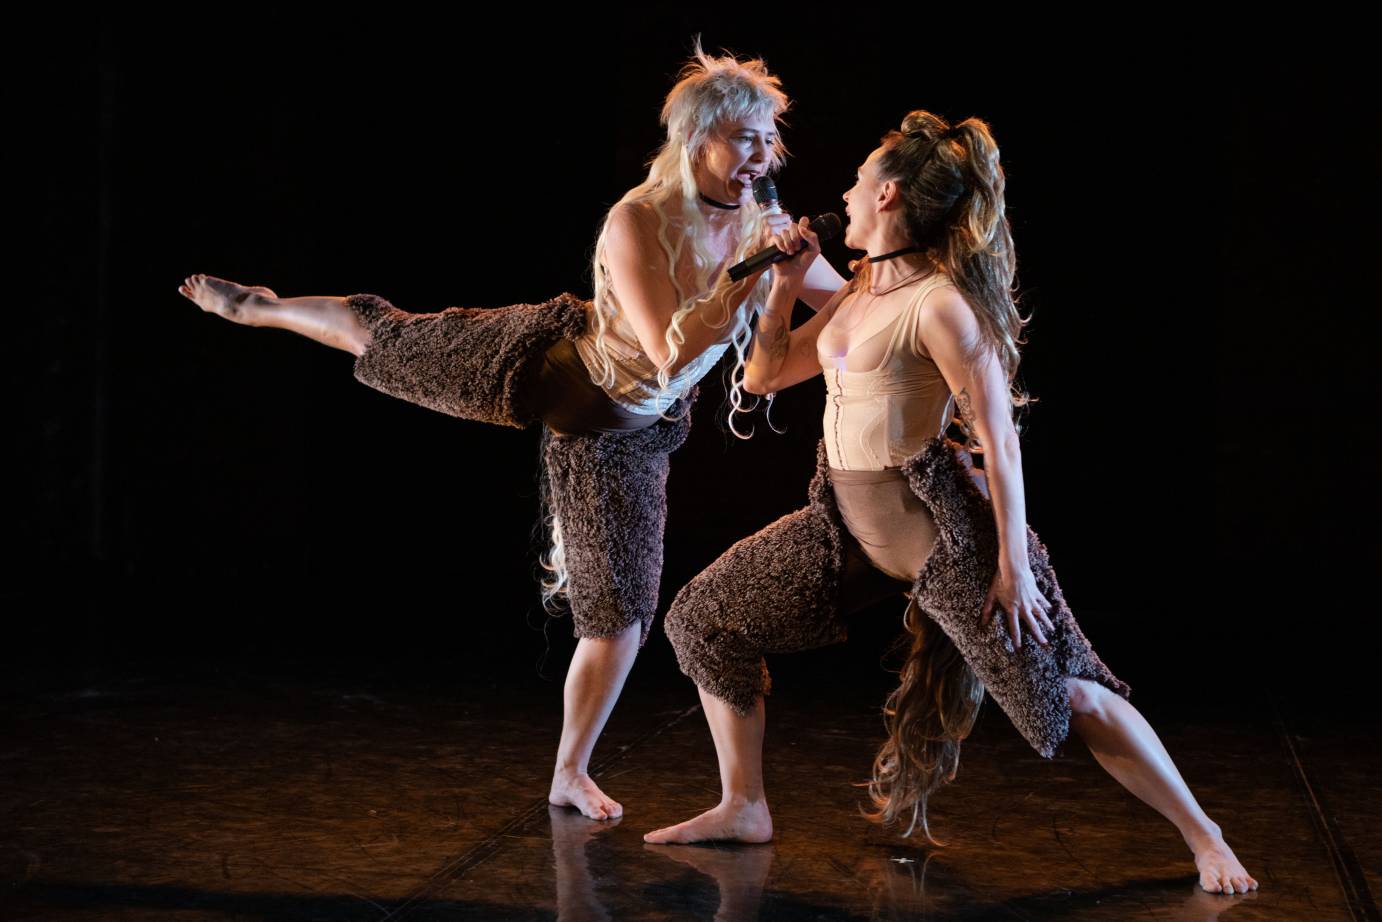 Two women, one lunging, the other in arabesque with mullets talk into microphones